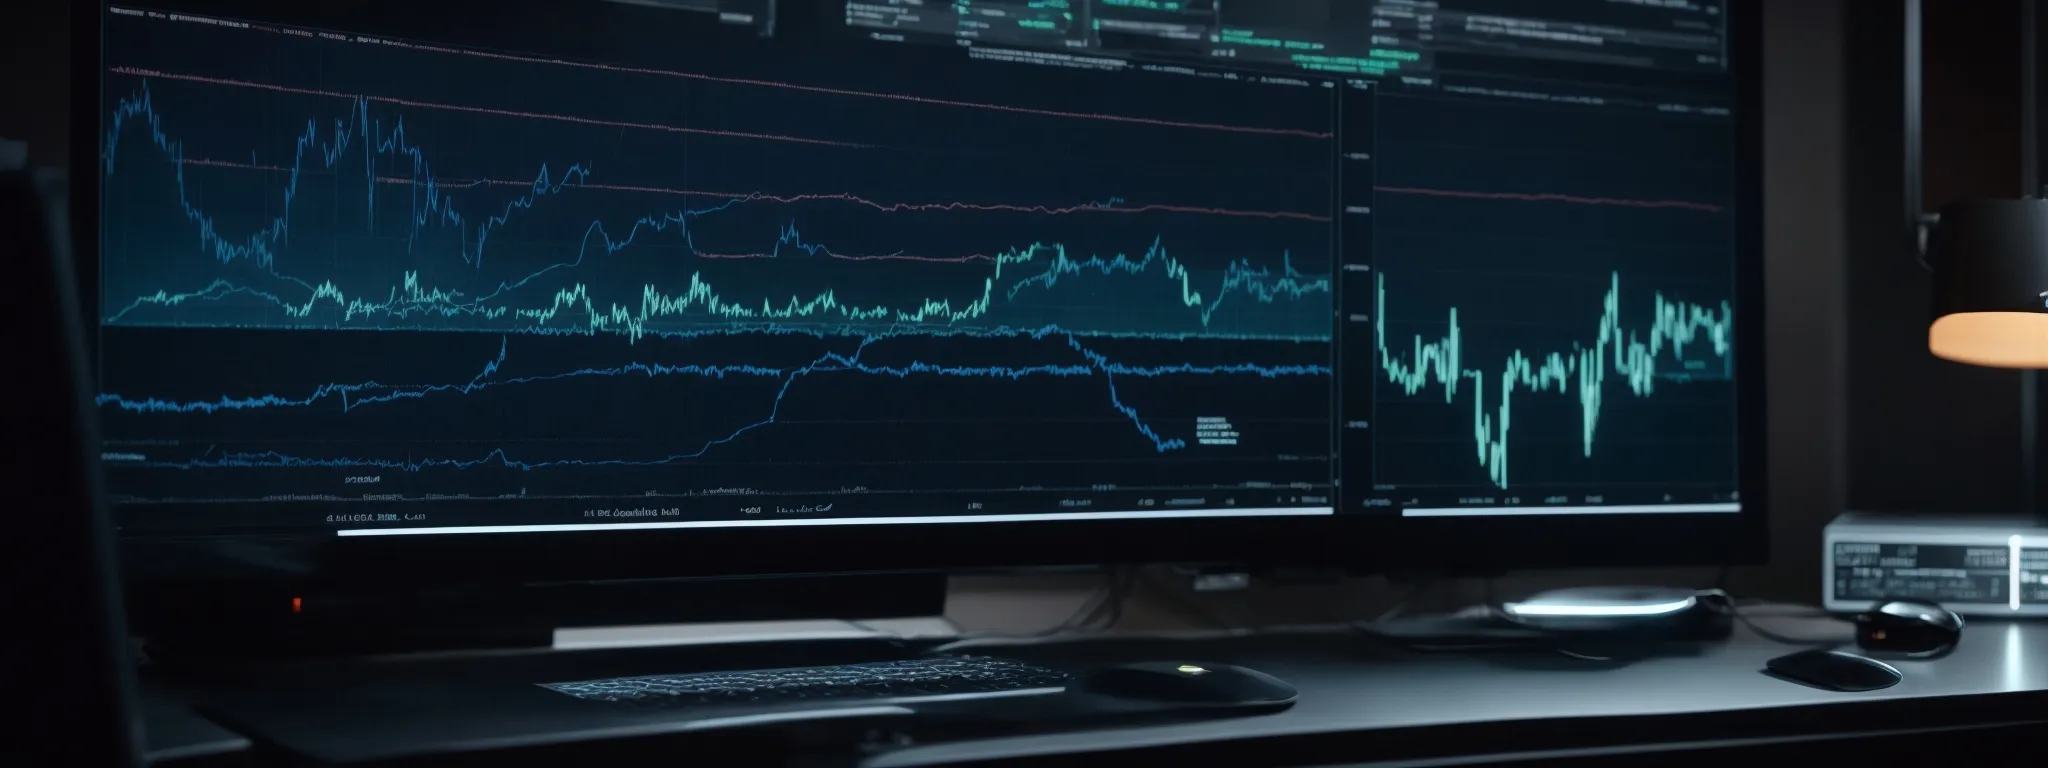 a sleek computer screen displays intricate graphs and charts while a glowing ai symbol indicates active data analysis.